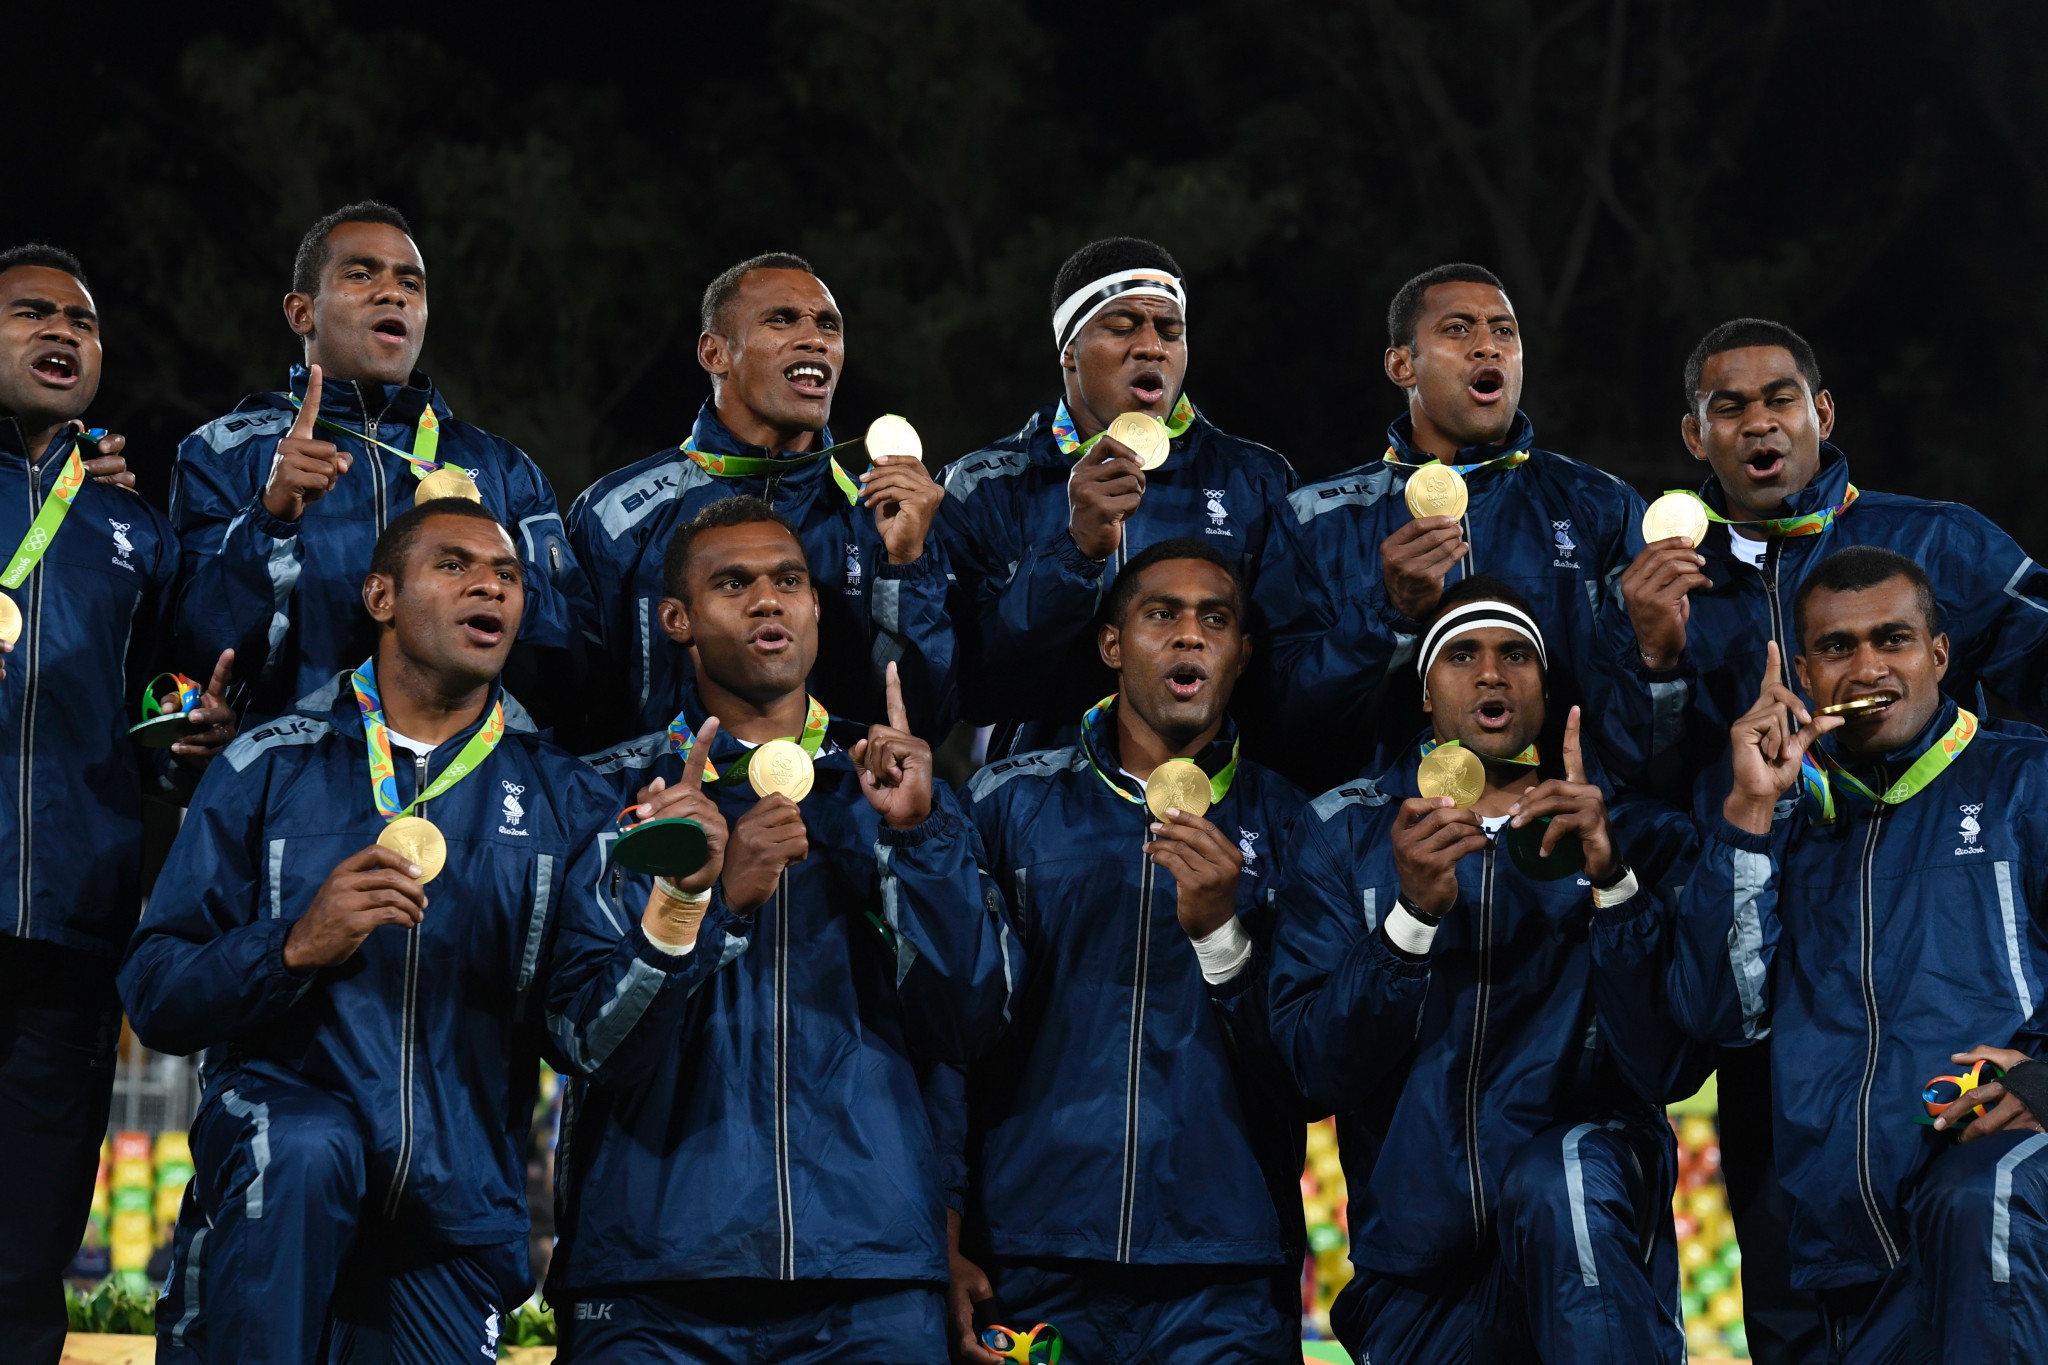 Fiji announce preliminary rugby sevens squad for Gold Coast 2018